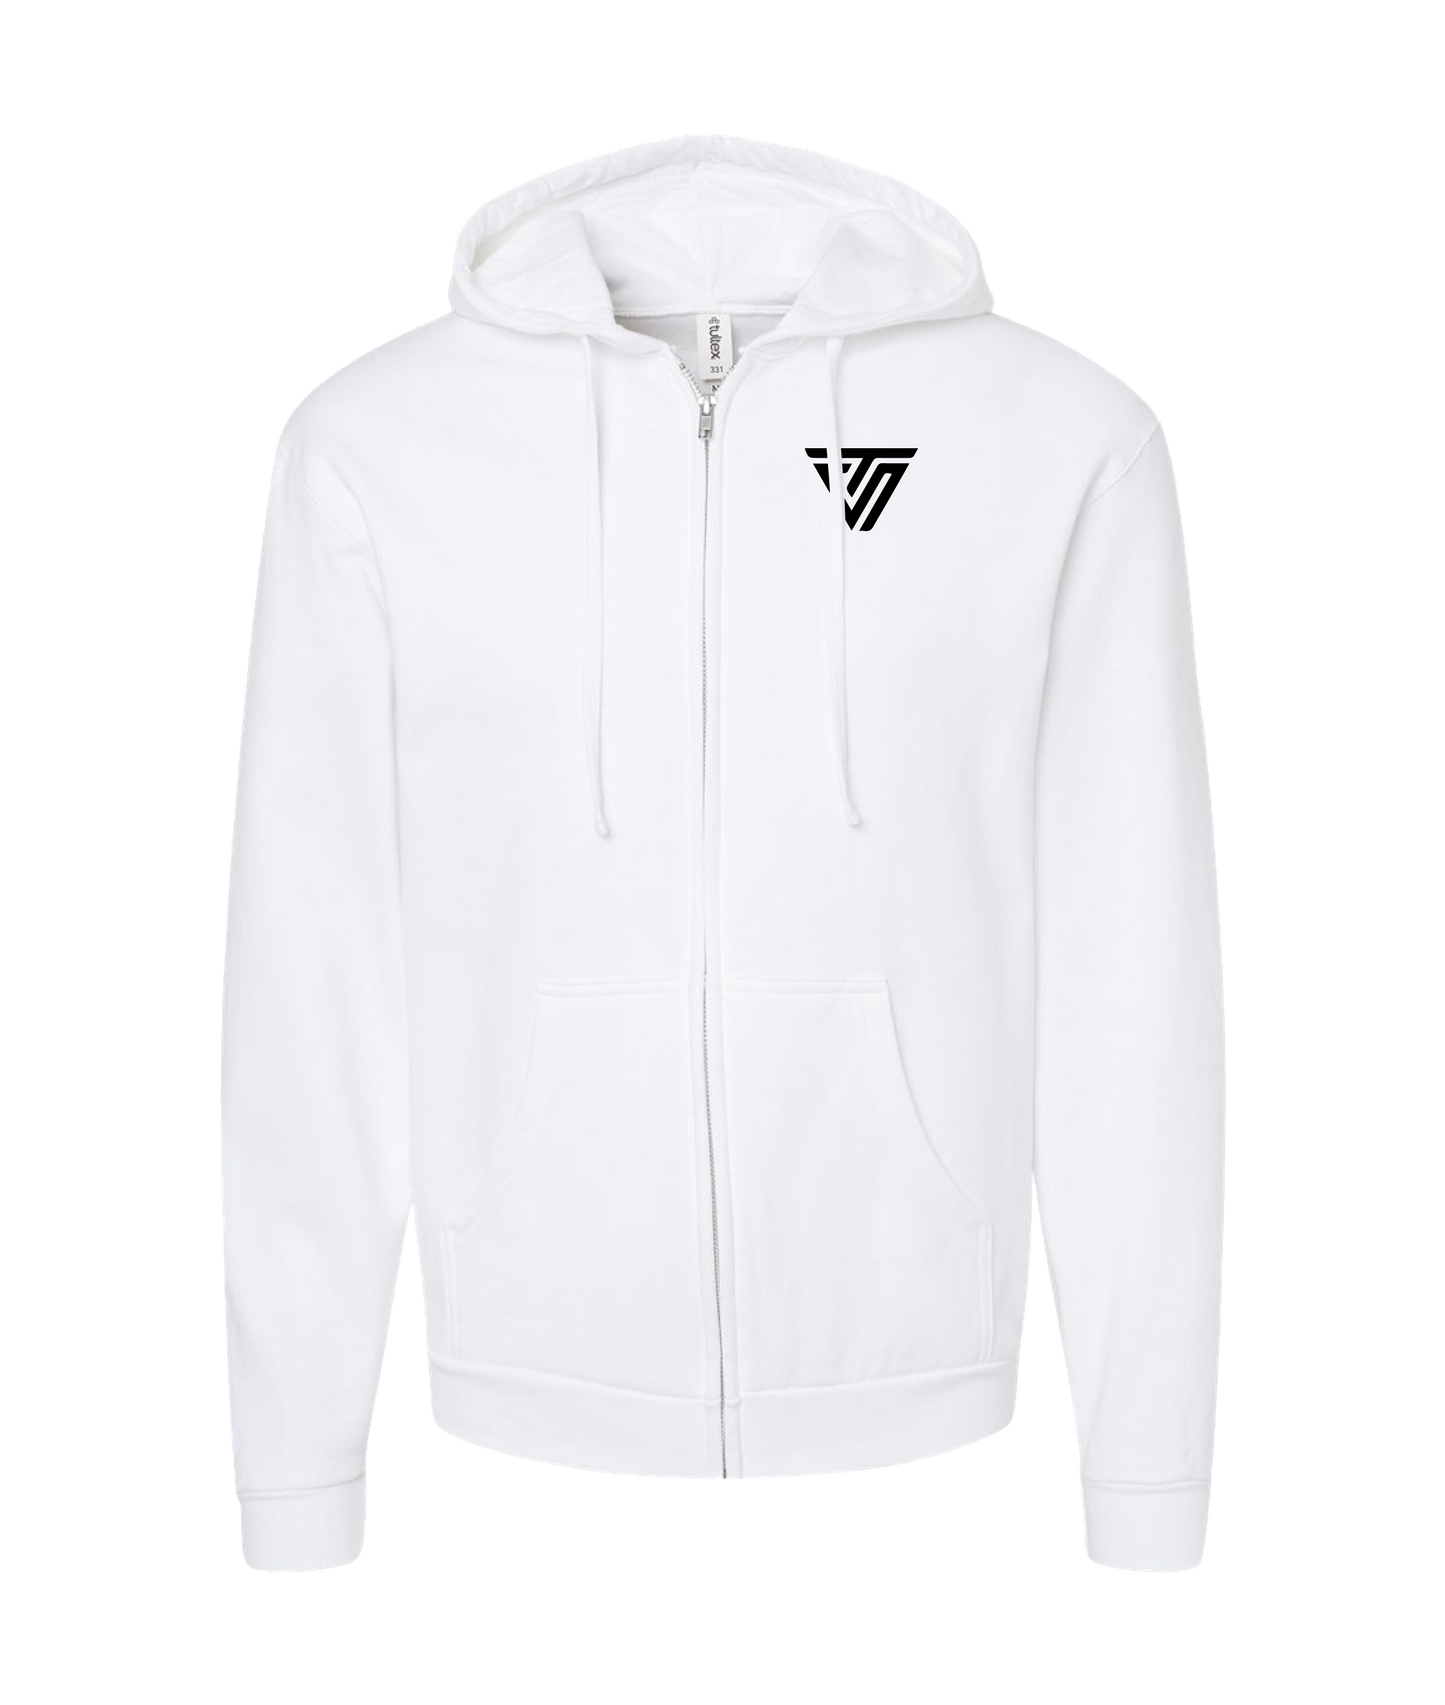 TheShift - Shift Front To Back - Black Zip Up Hoodie